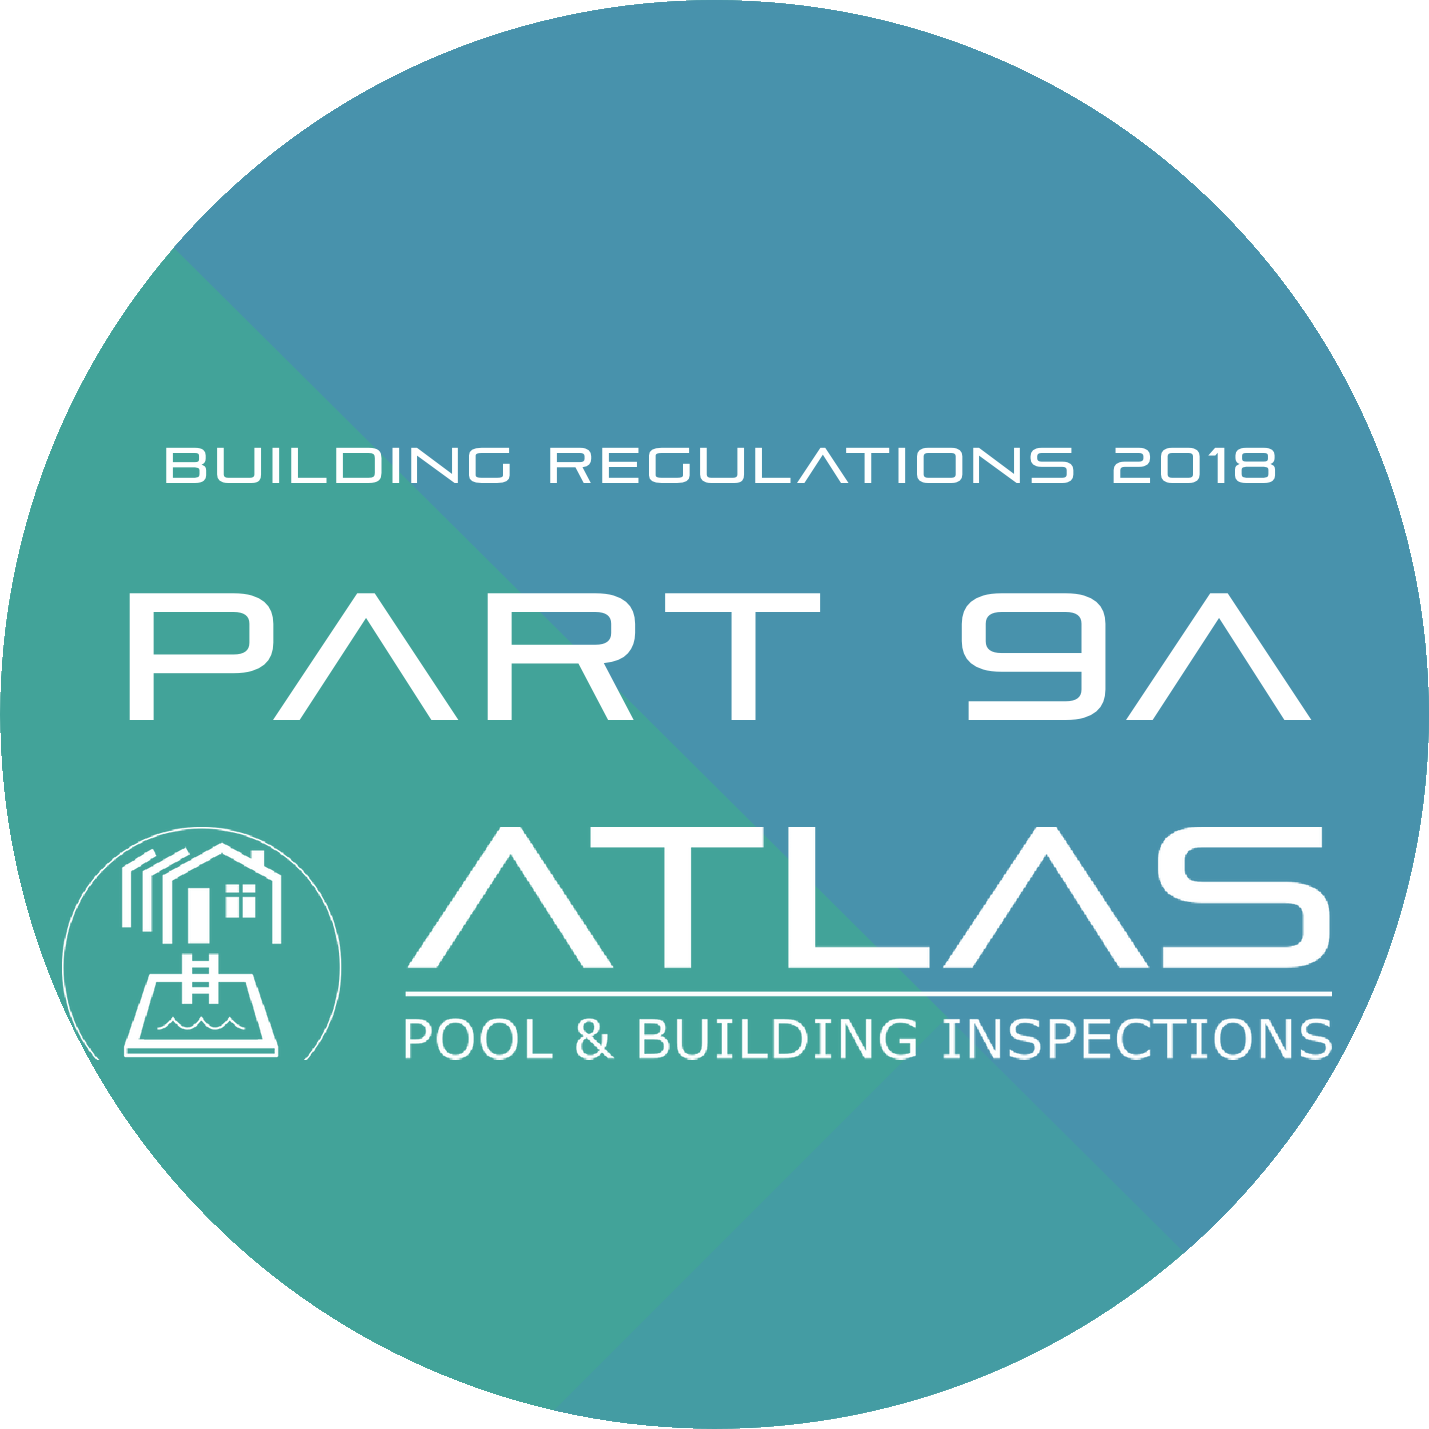 pool-safety-report-for-part-9a-of-building-regulations-2018-safetyculture